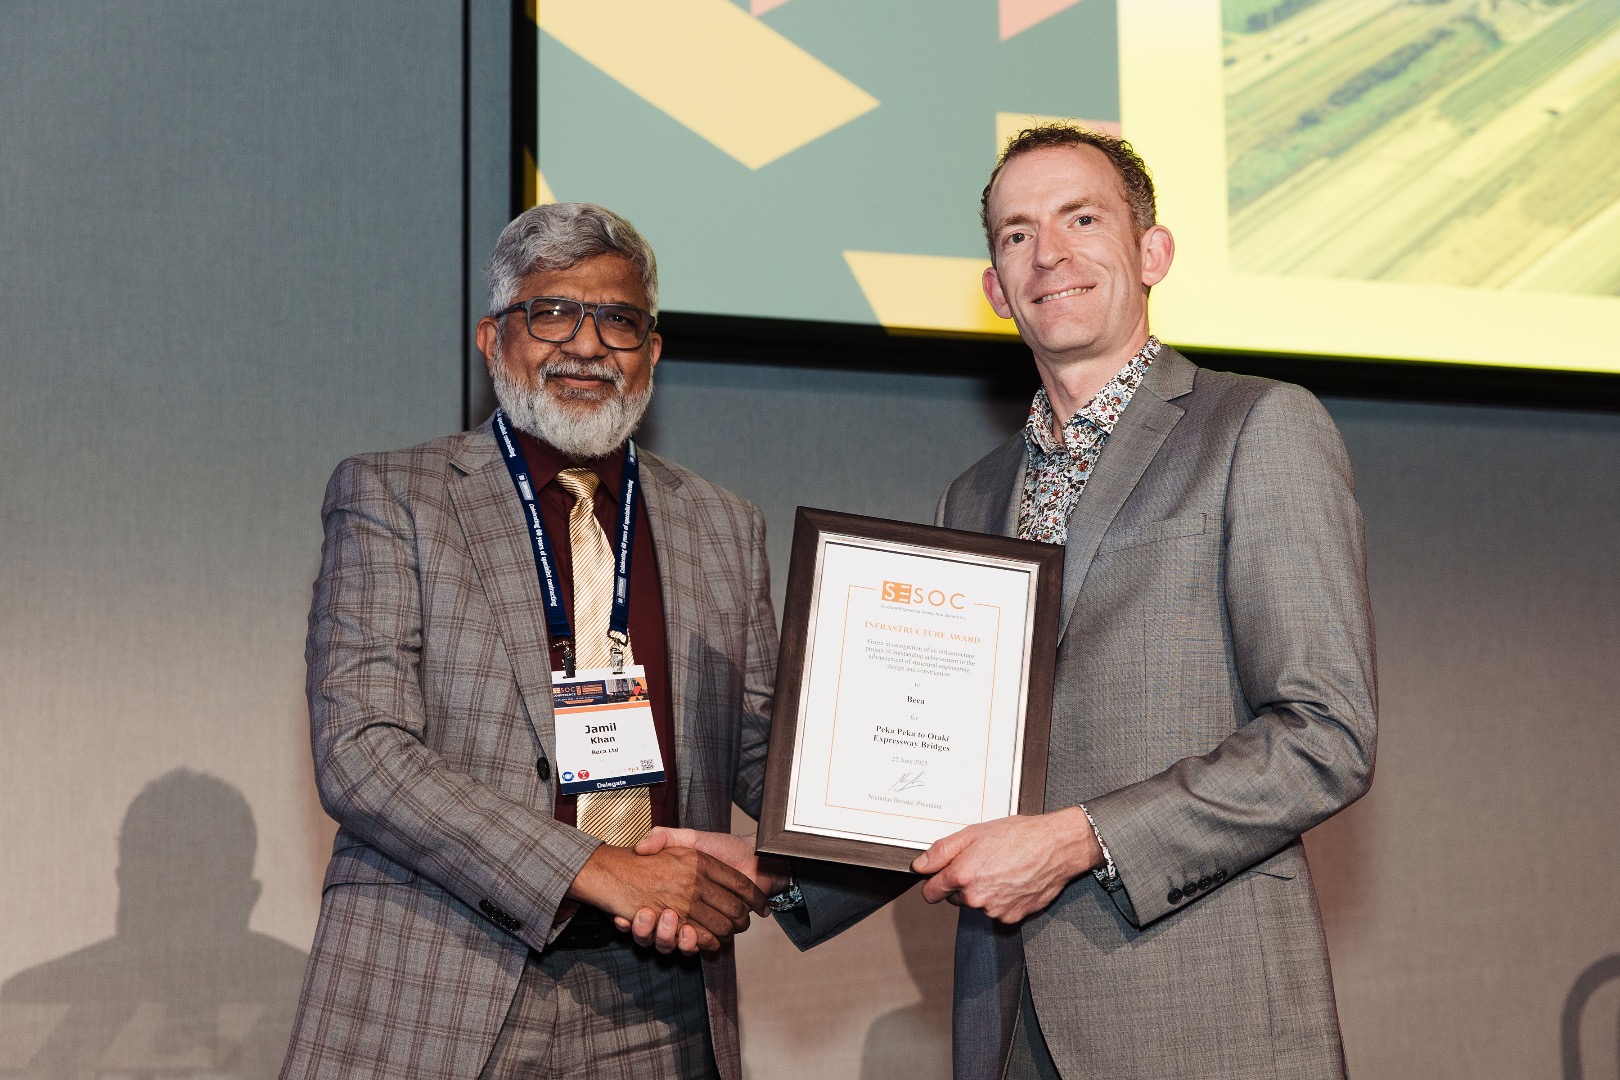 Jamil Khan (Beca Technical Director – Structural Engineering) receives the Infrastructure Award at the 2023 Structural Engineering Excellence Awards for Peka Peka to Ōtaki Expressway Project Bridges.